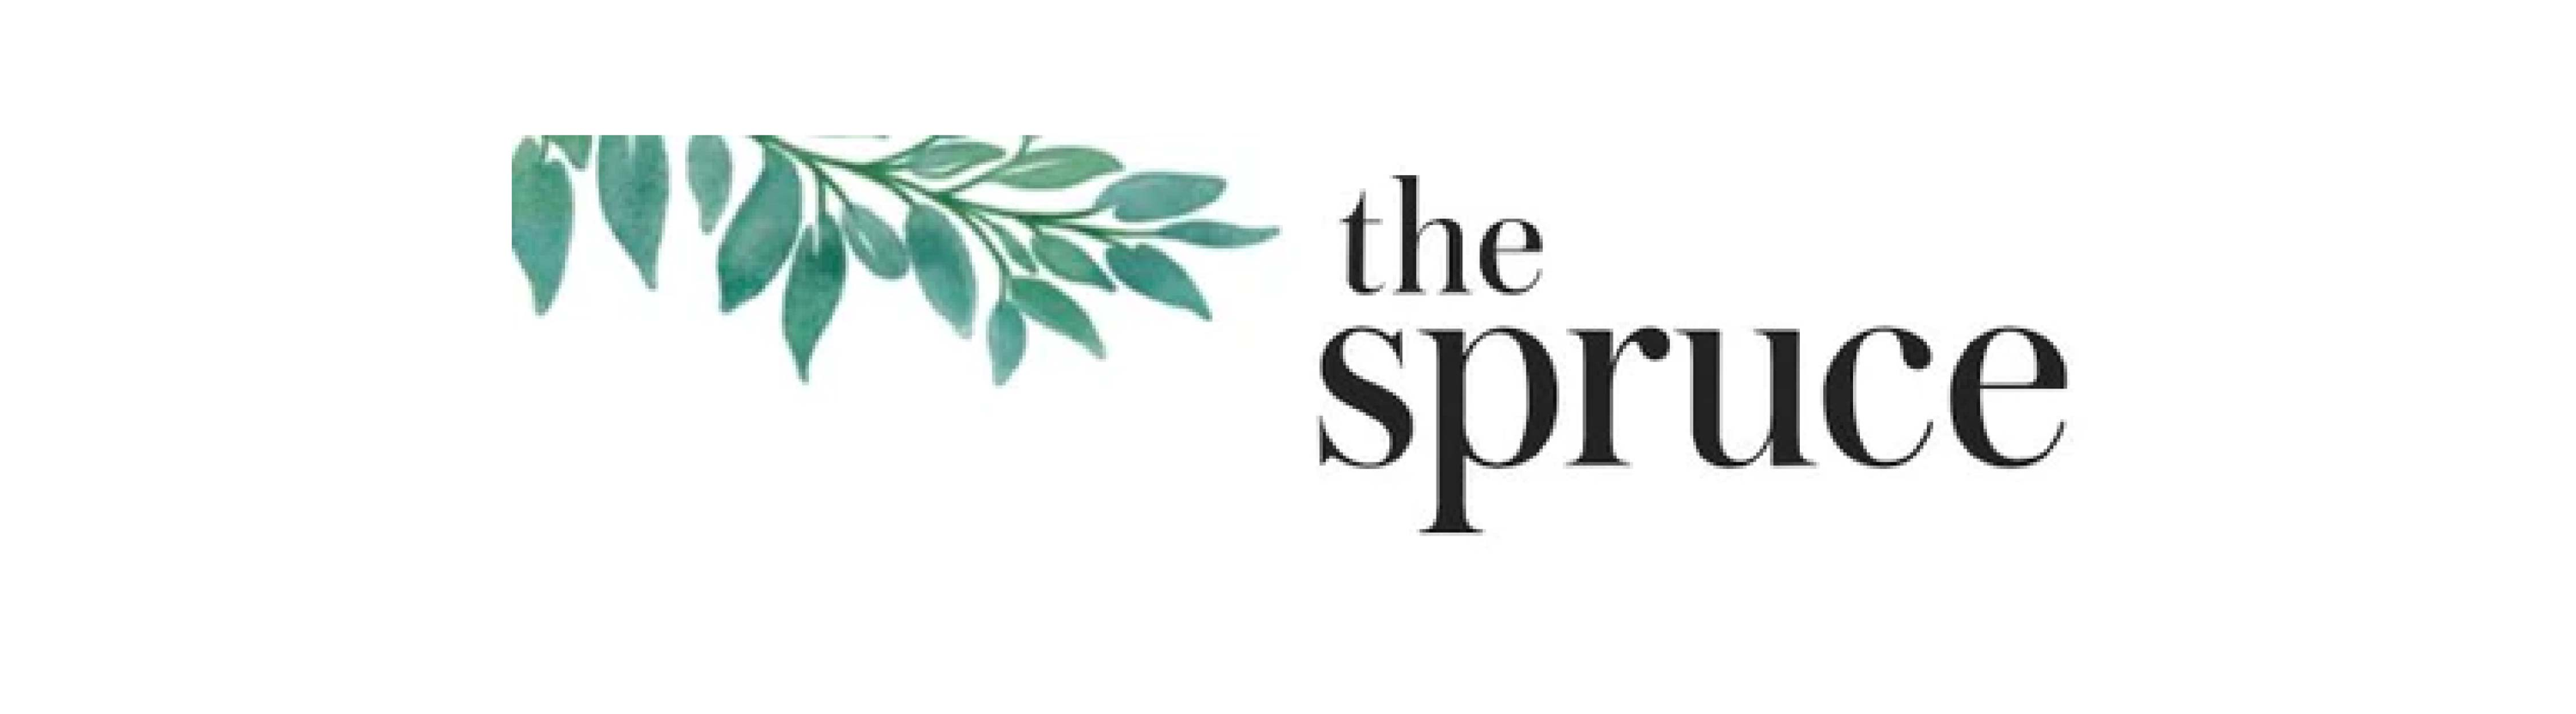 the spruce article